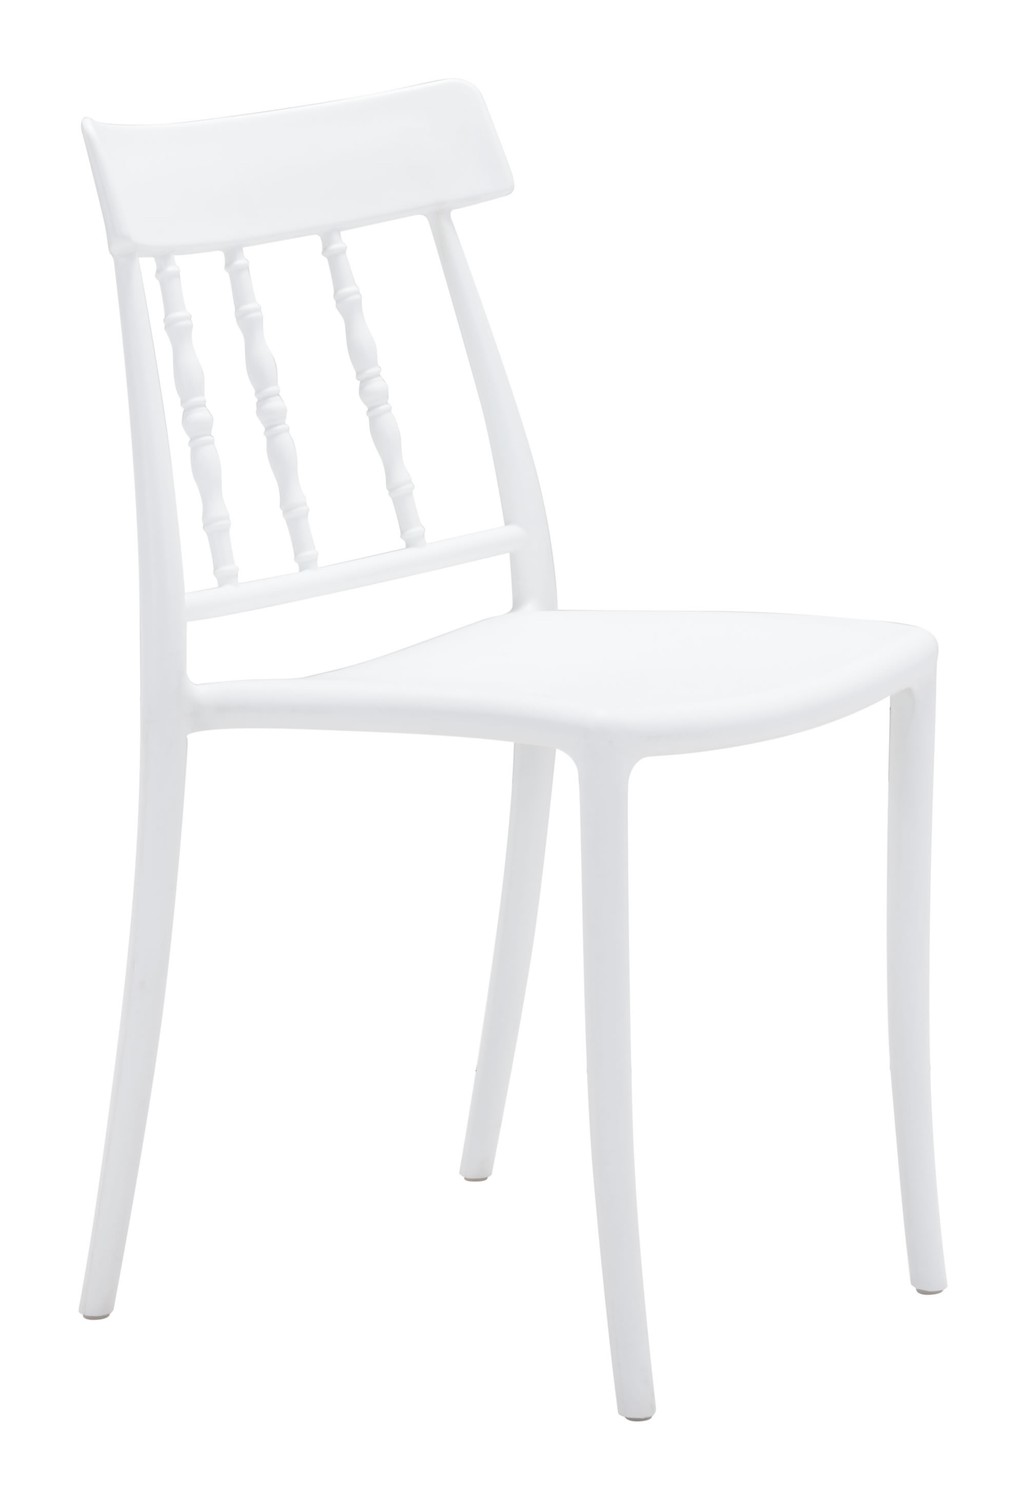 17.7" x 20.7" x 33.1" White, Plastic, Dining Chair - Set of 2